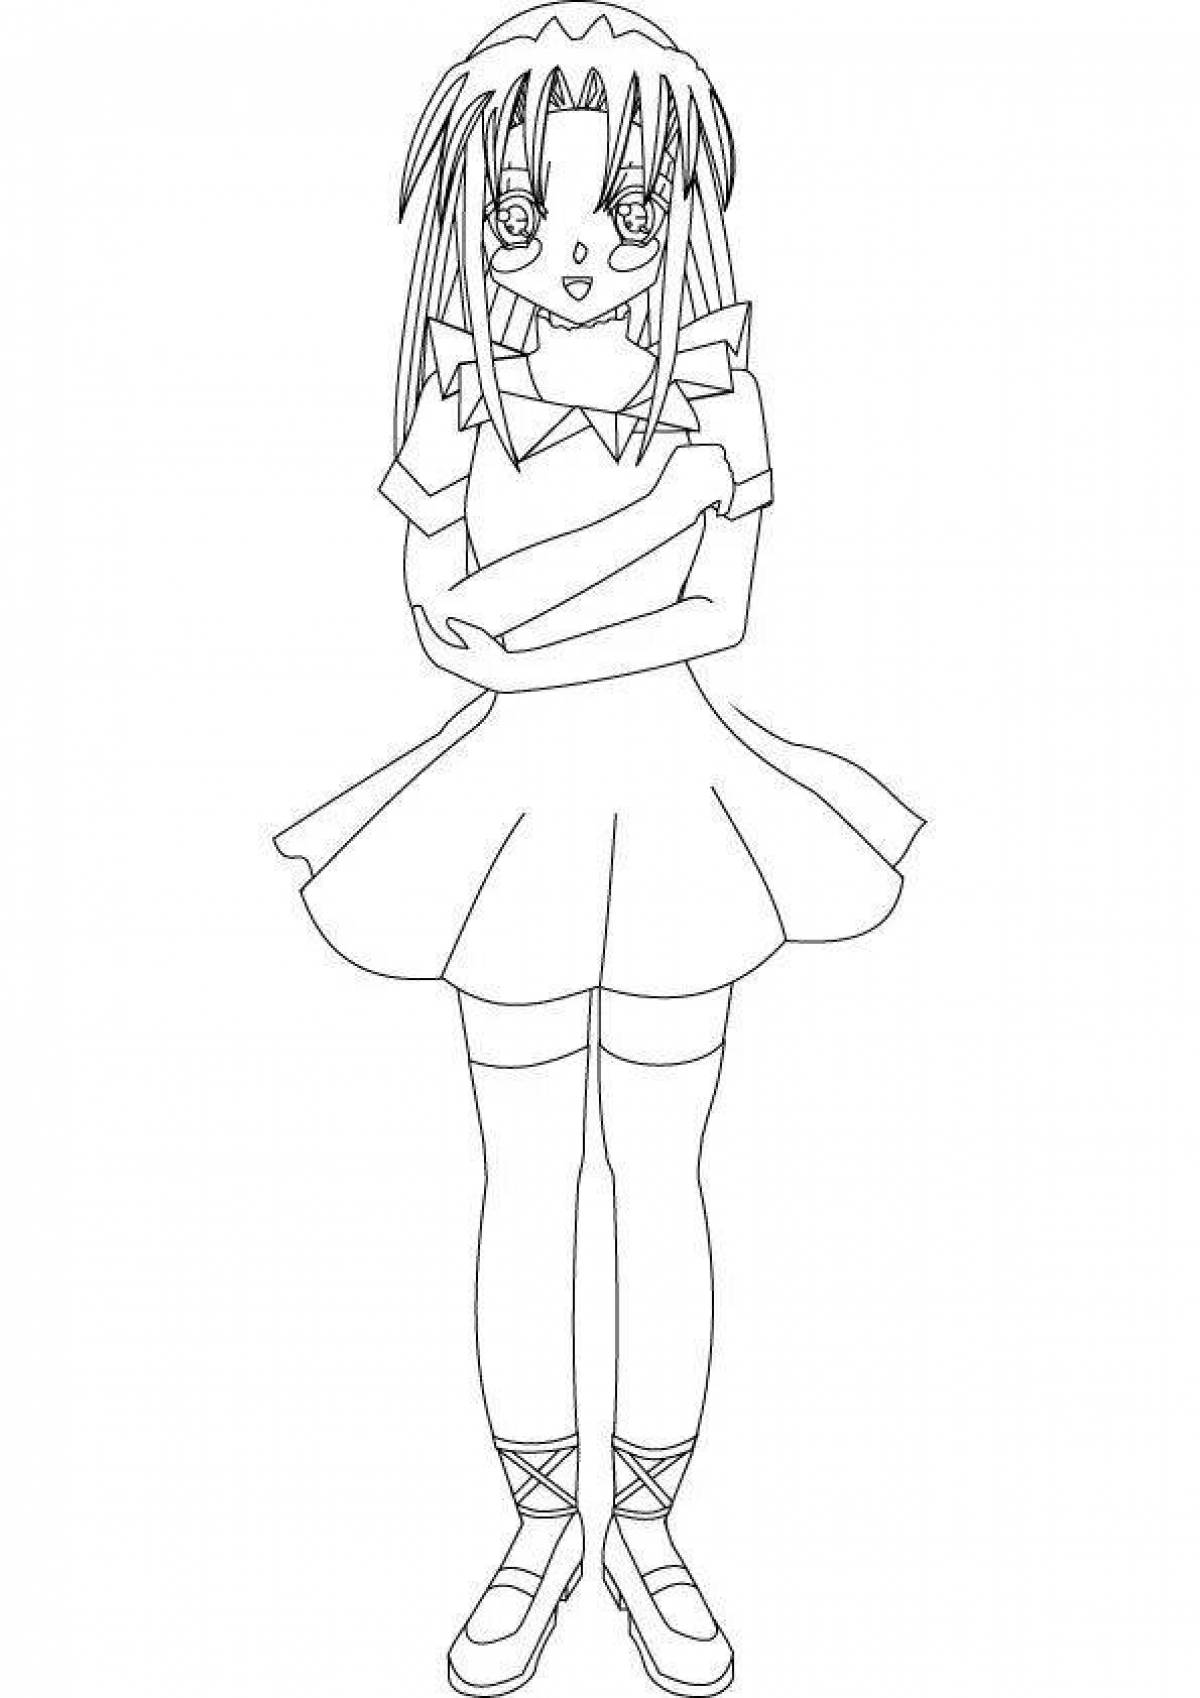 Delightful anime girl coloring pages full body